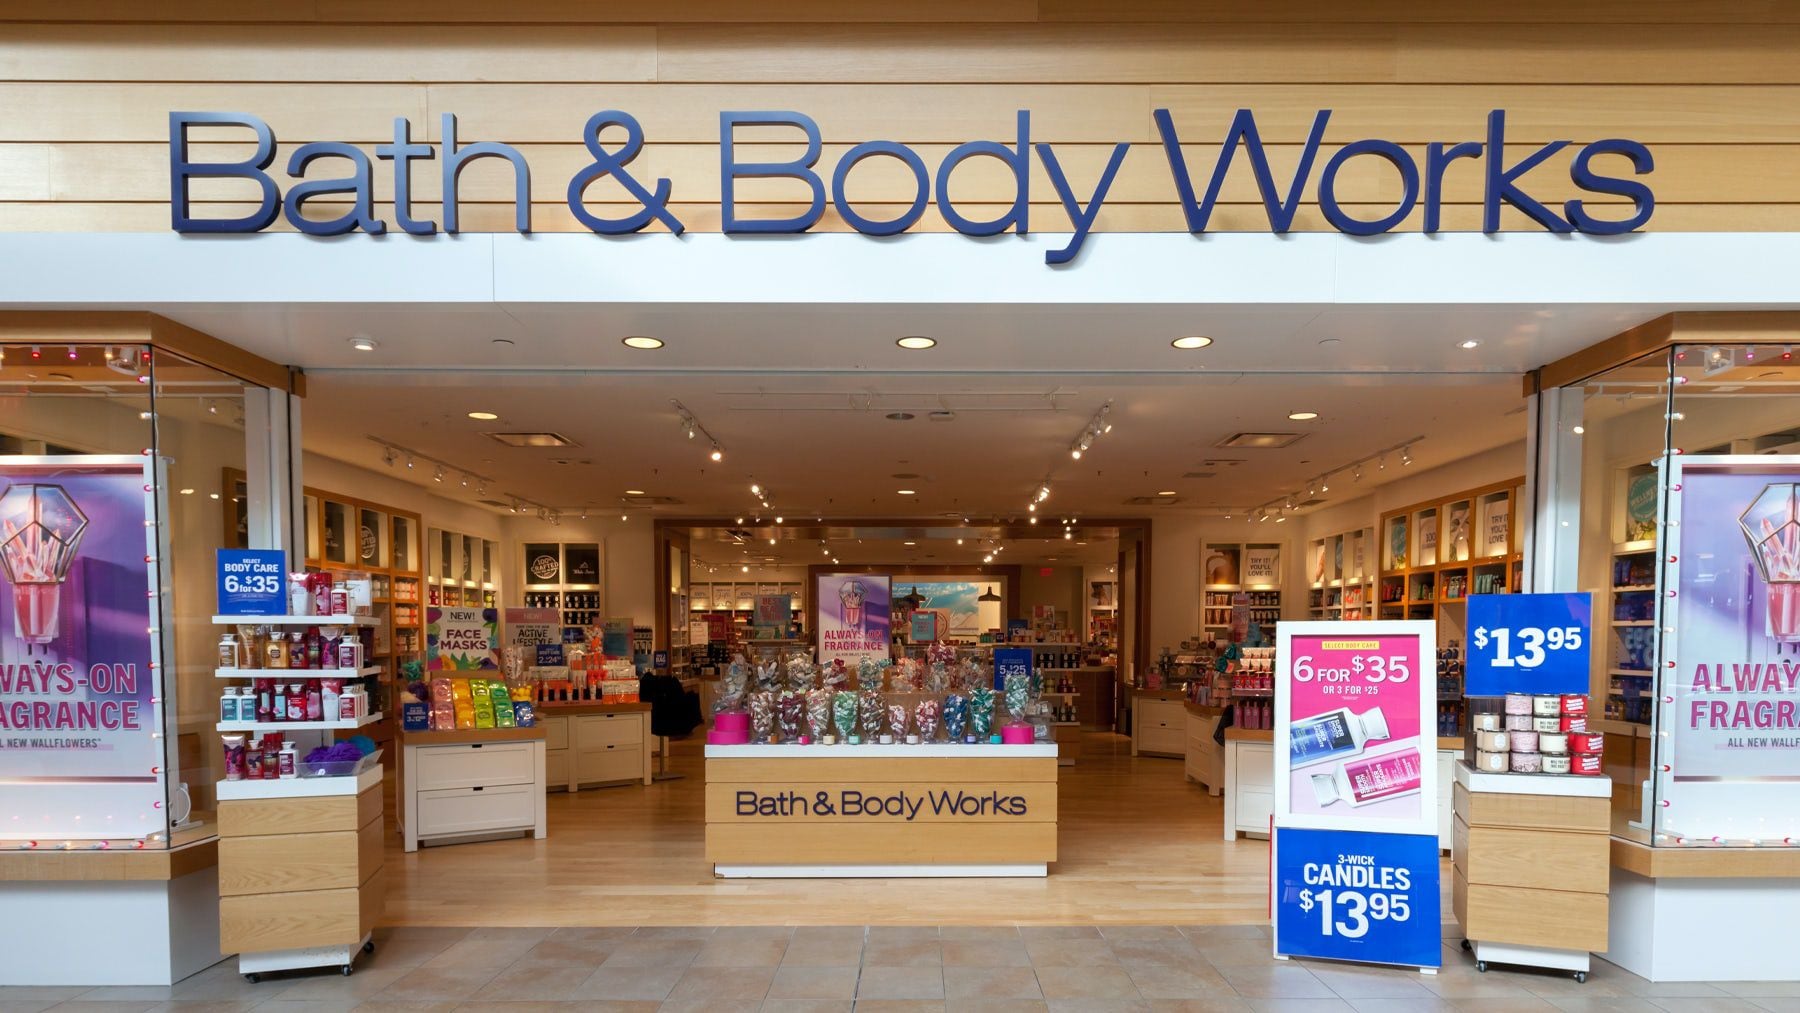 Bath & Body Works Projects Downbeat FY Sales, Profit on Slowing Demand